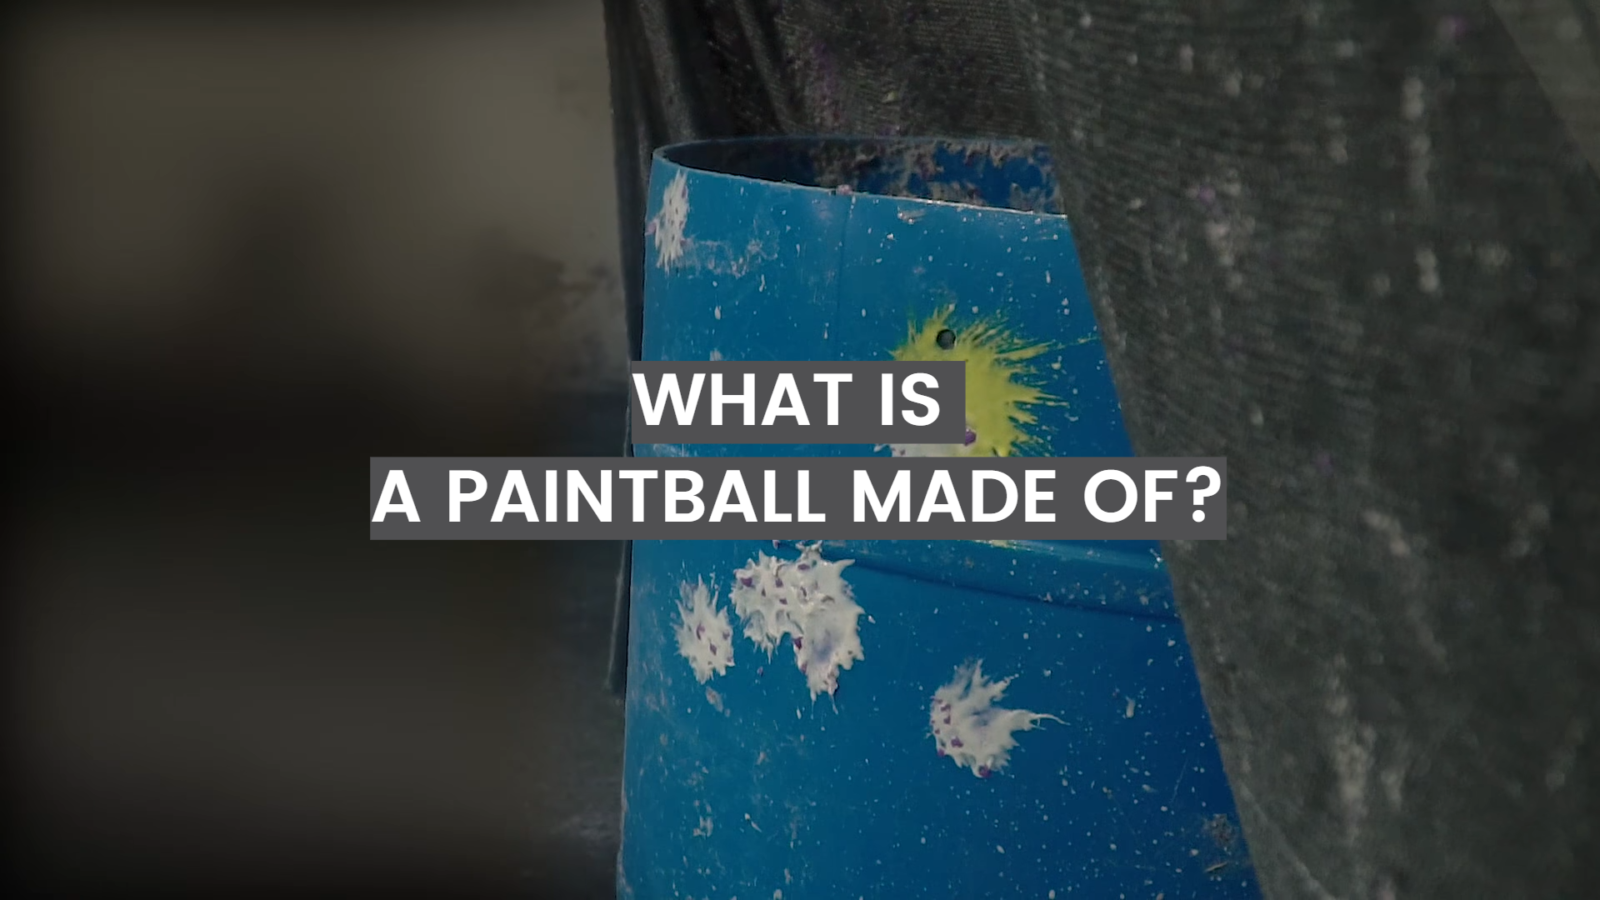 What Is a Paintball Made Of?